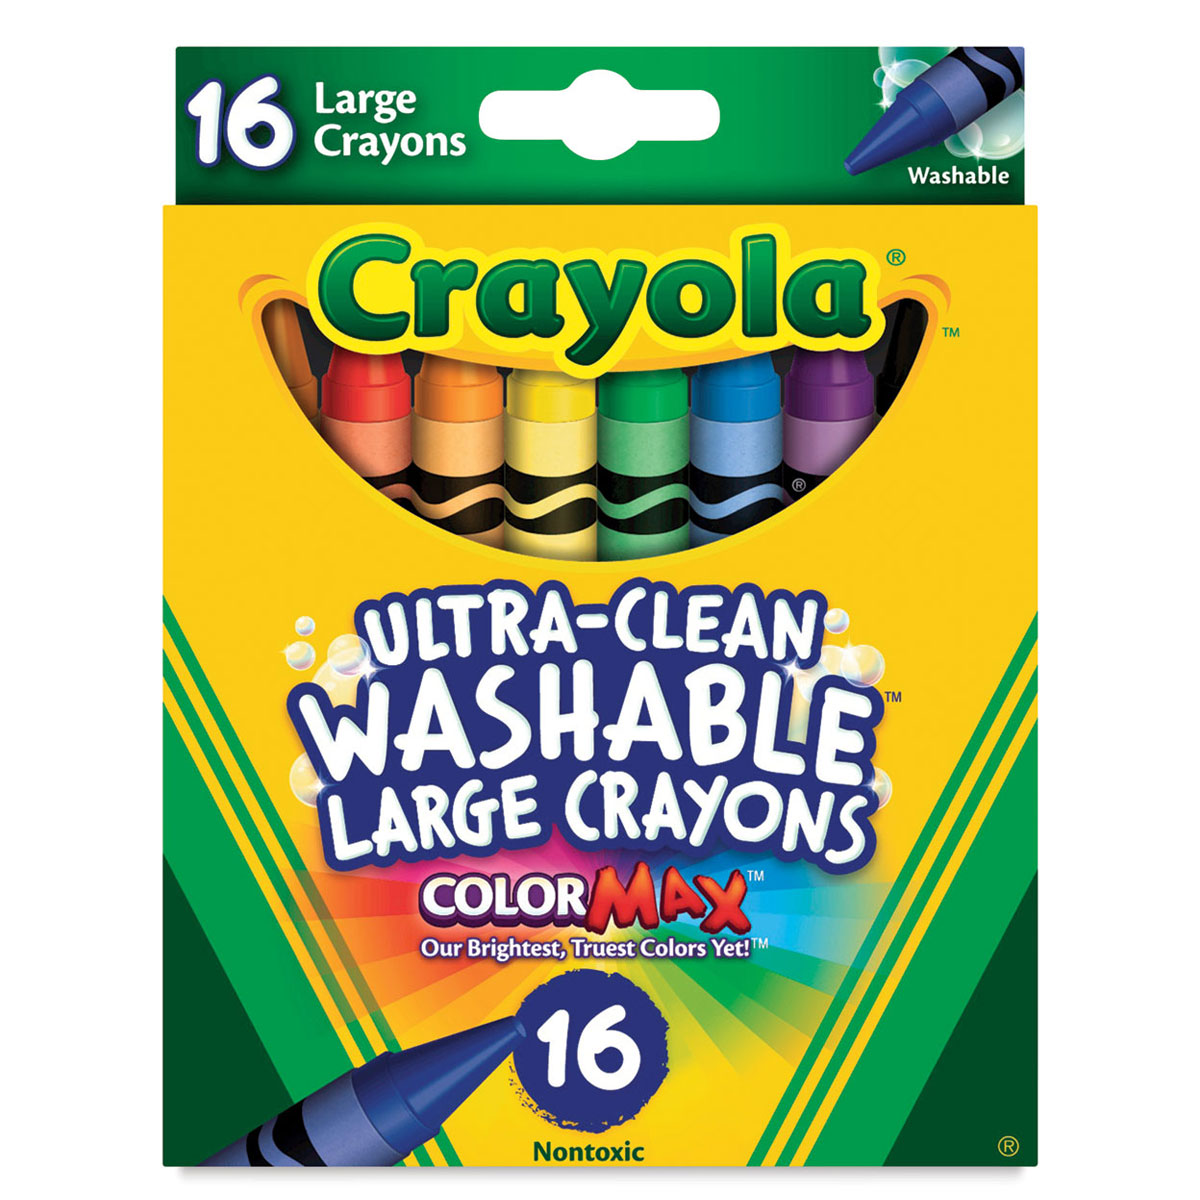 Crayola Large Washable Crayons, 16 Ct, School Supplies for Kindergarten, Toddler Crayons - image 3 of 4